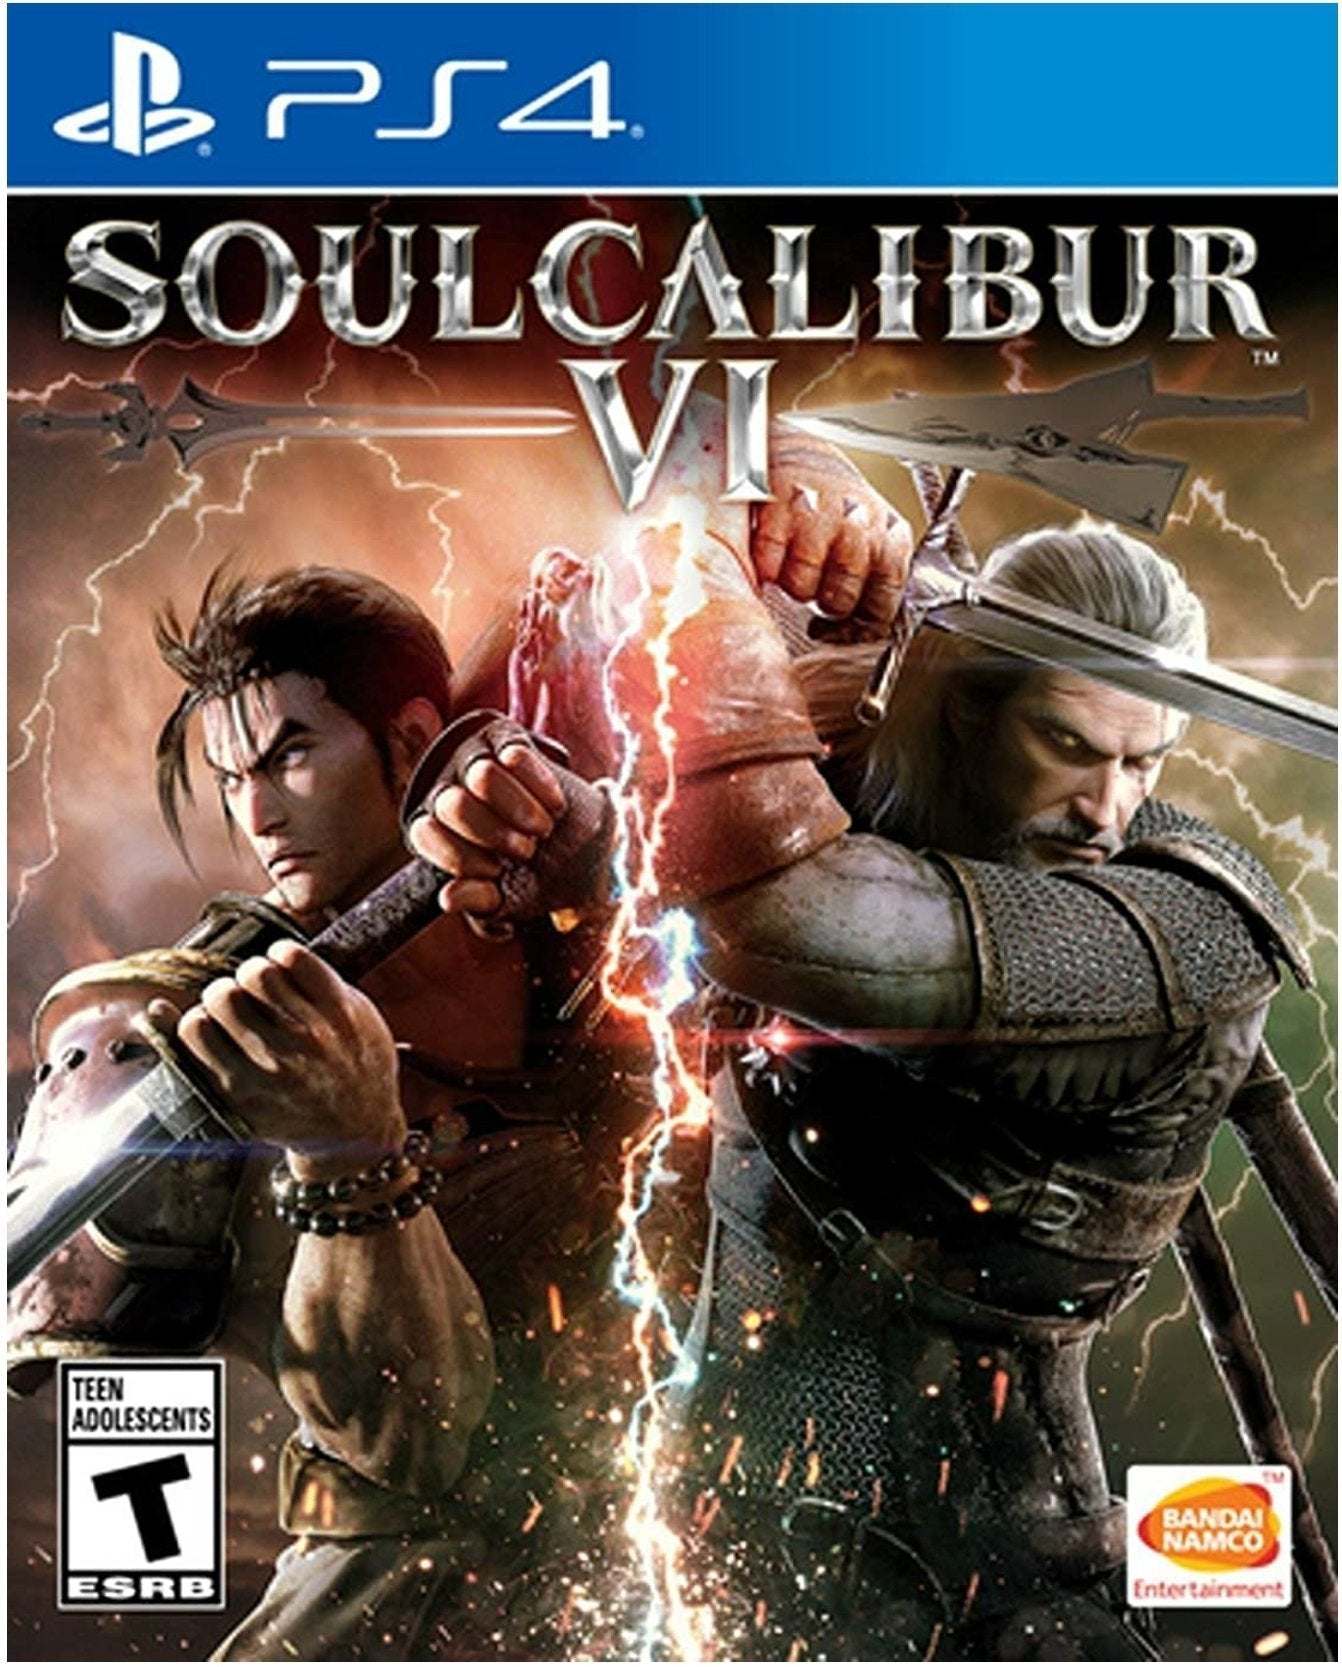 SOULCALIBUR VI PLAY STATION 4 - PS4 - Easy Video Game